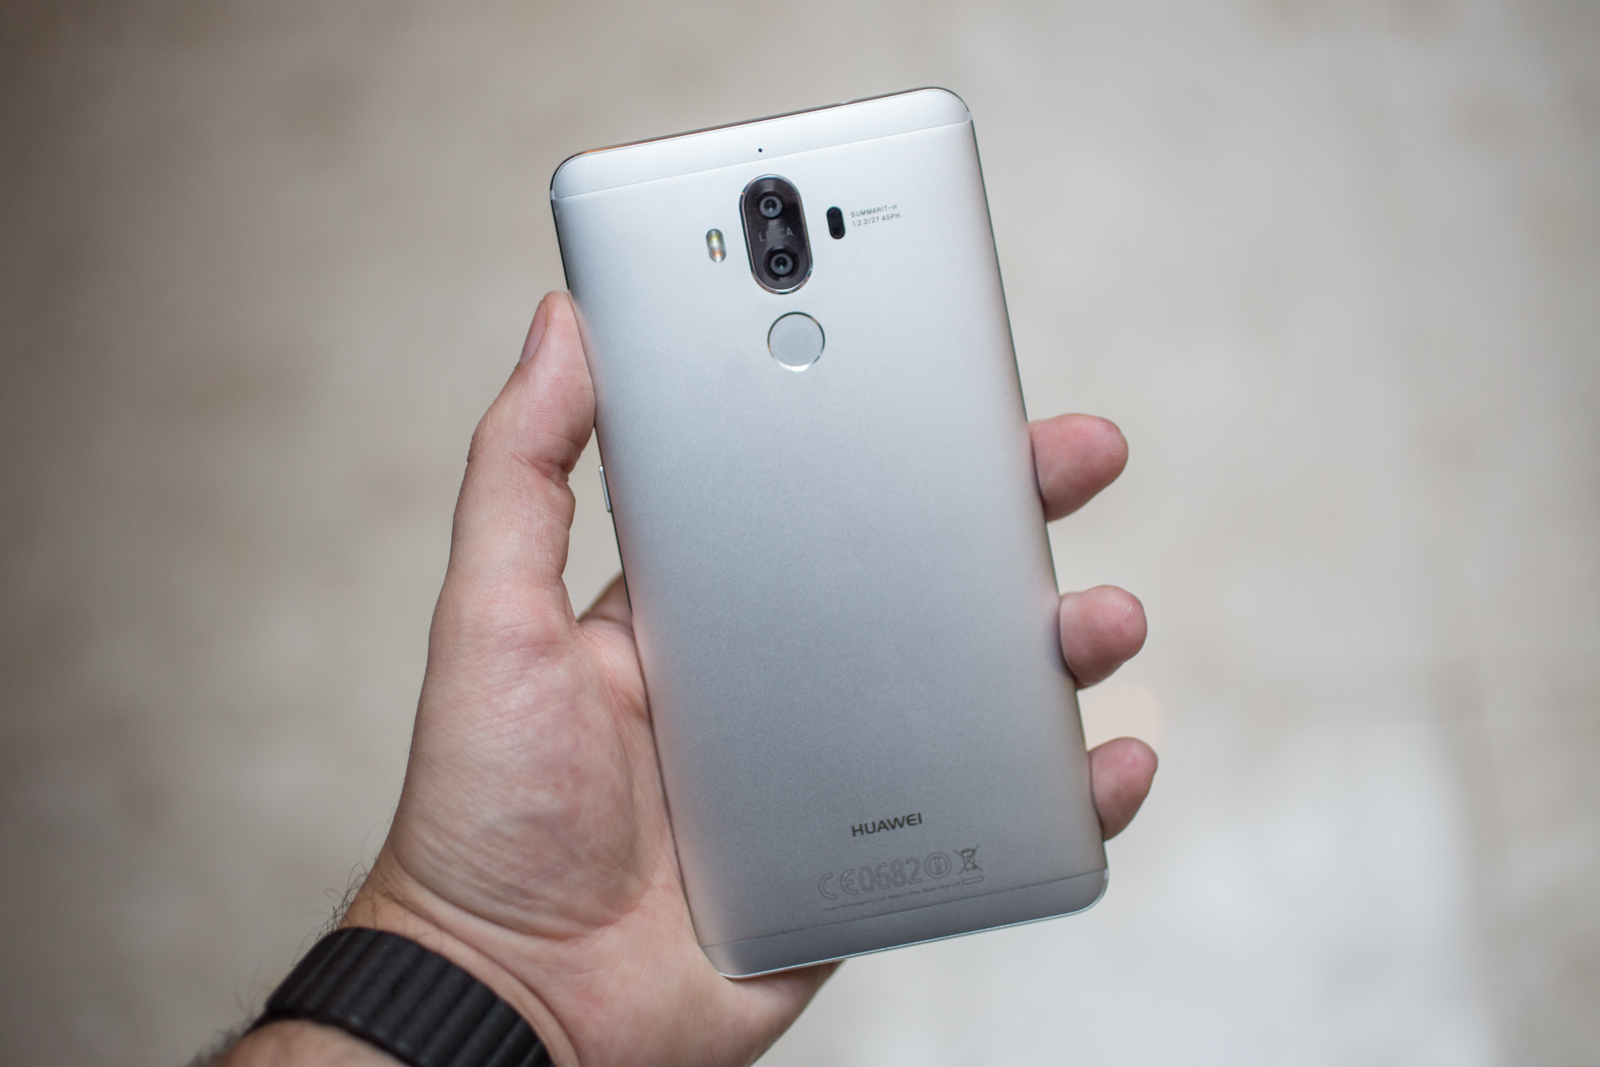 Contable Plaga satélite Huawei Mate 9 review: Miss your Note 7? This is the big-screened phone to  buy - CNET